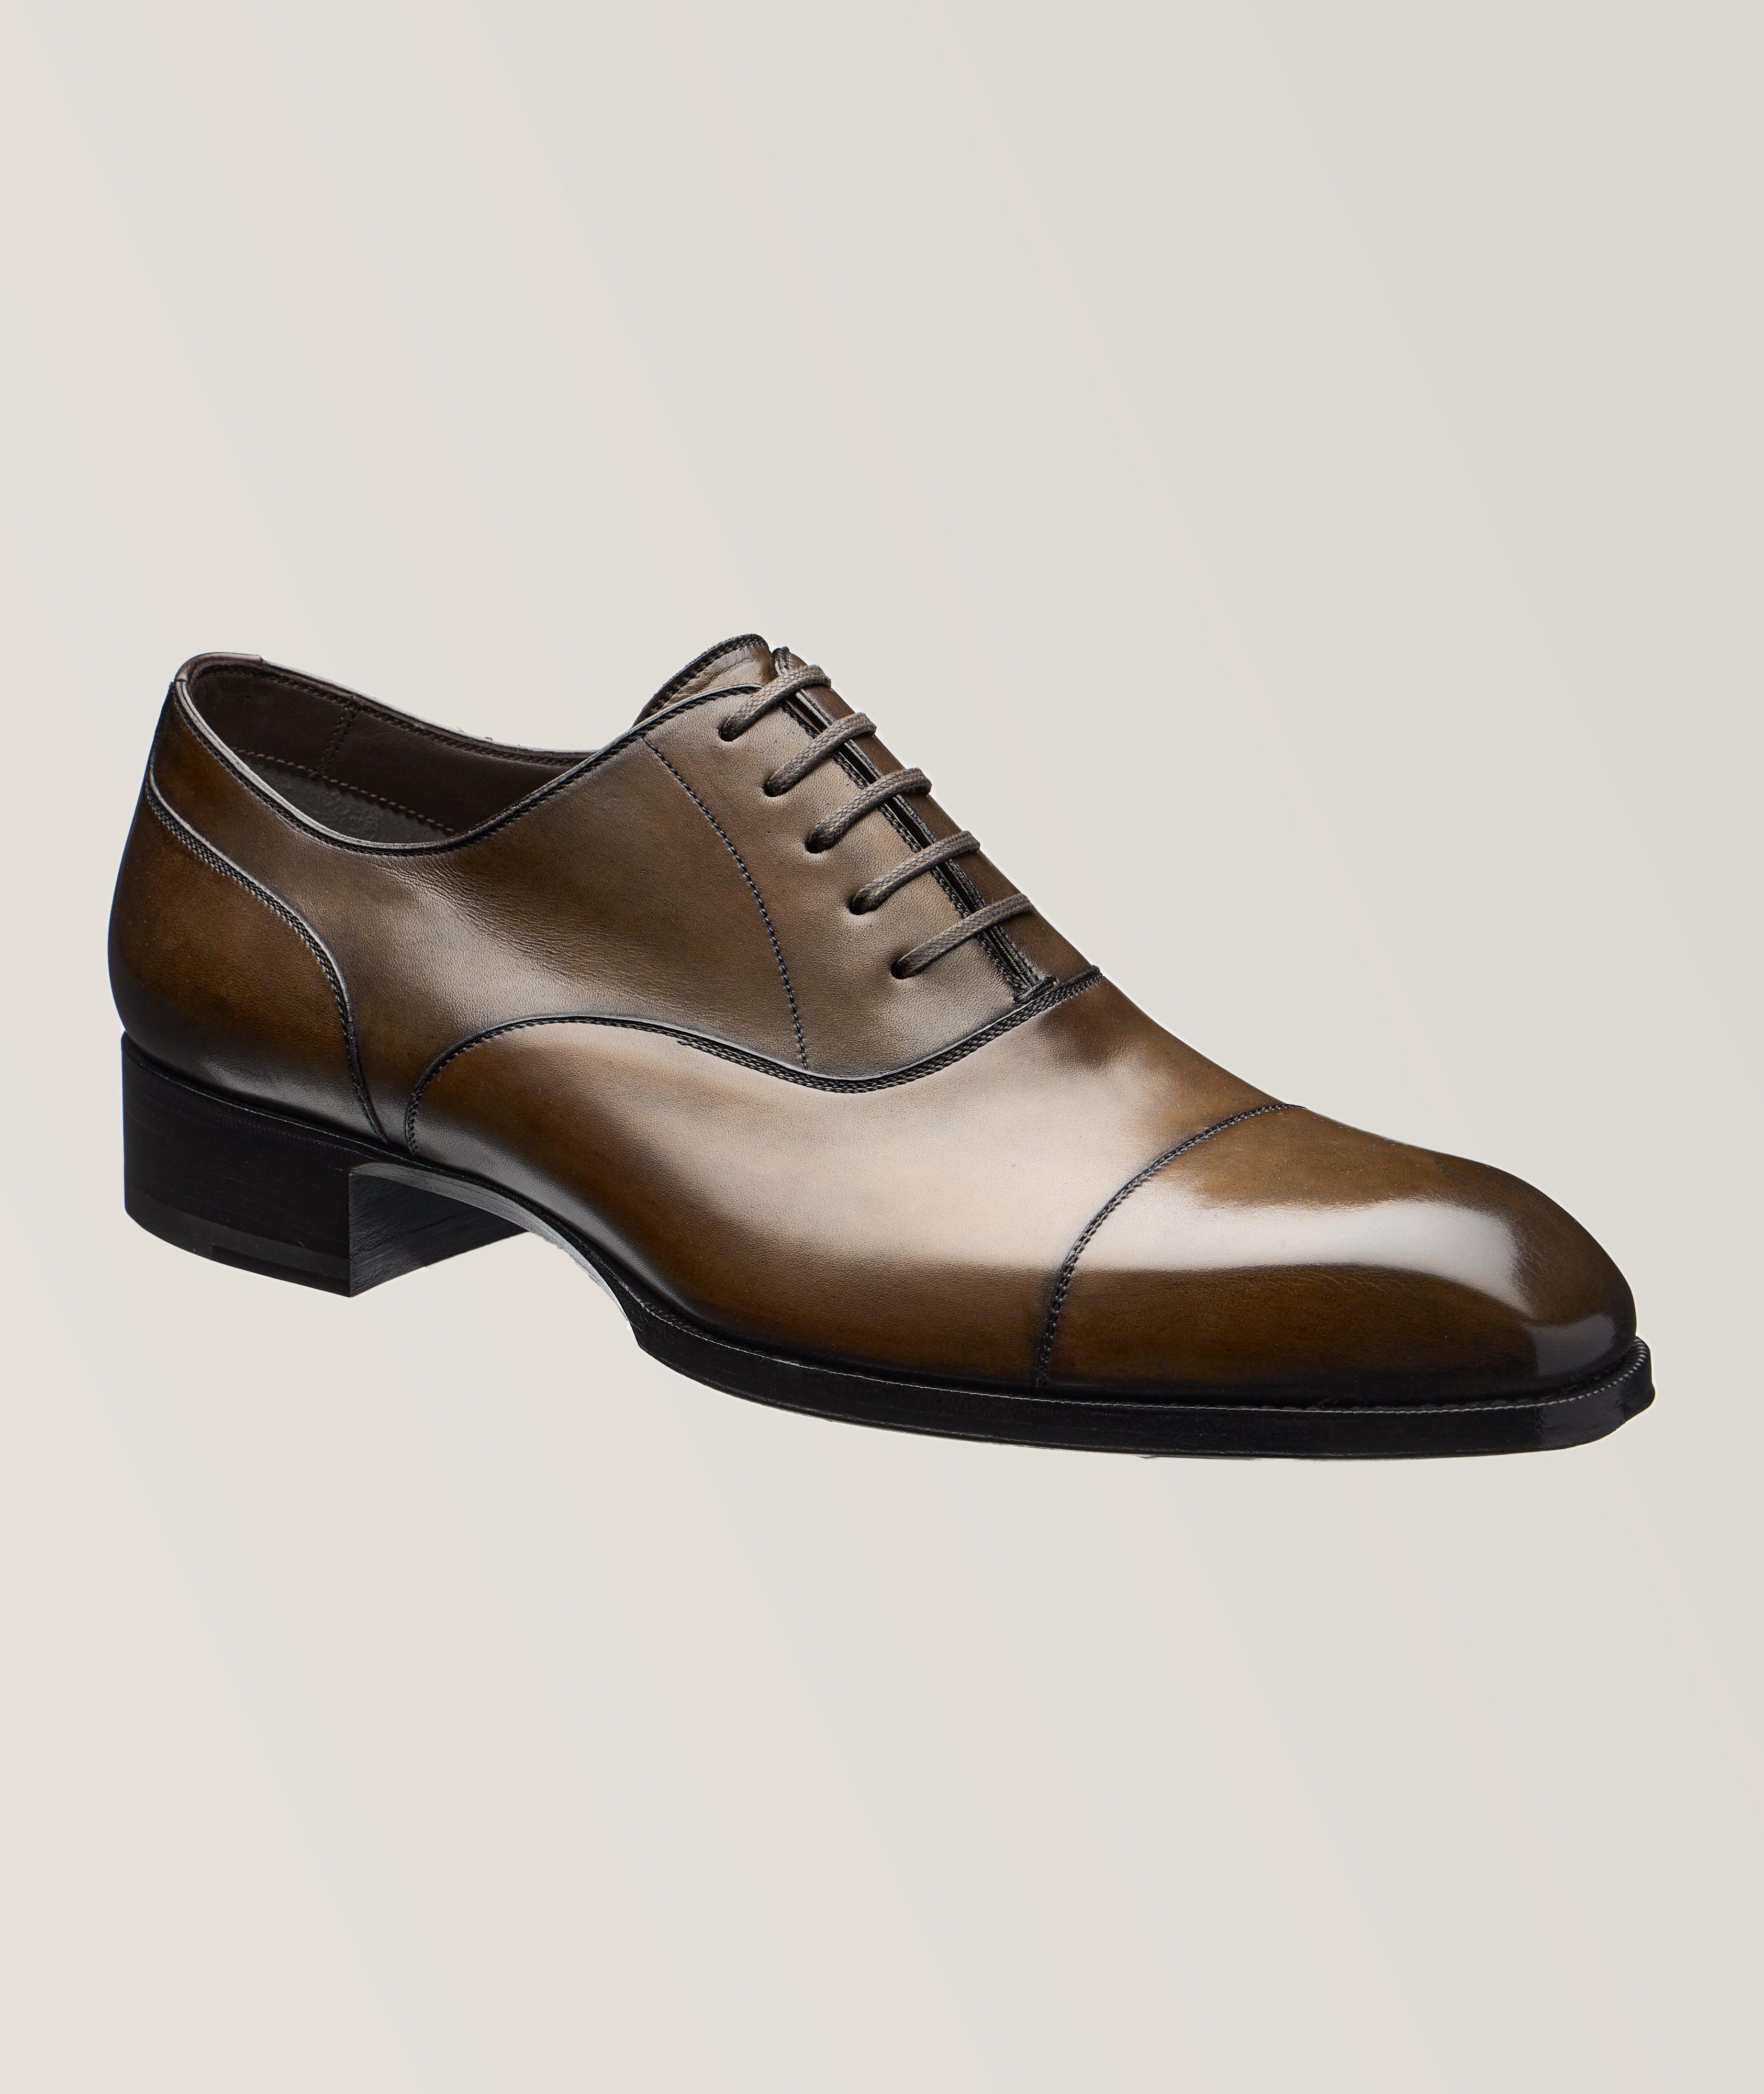 Louis Vuitton leather dress shoes clean and neat sneaker for Sale in